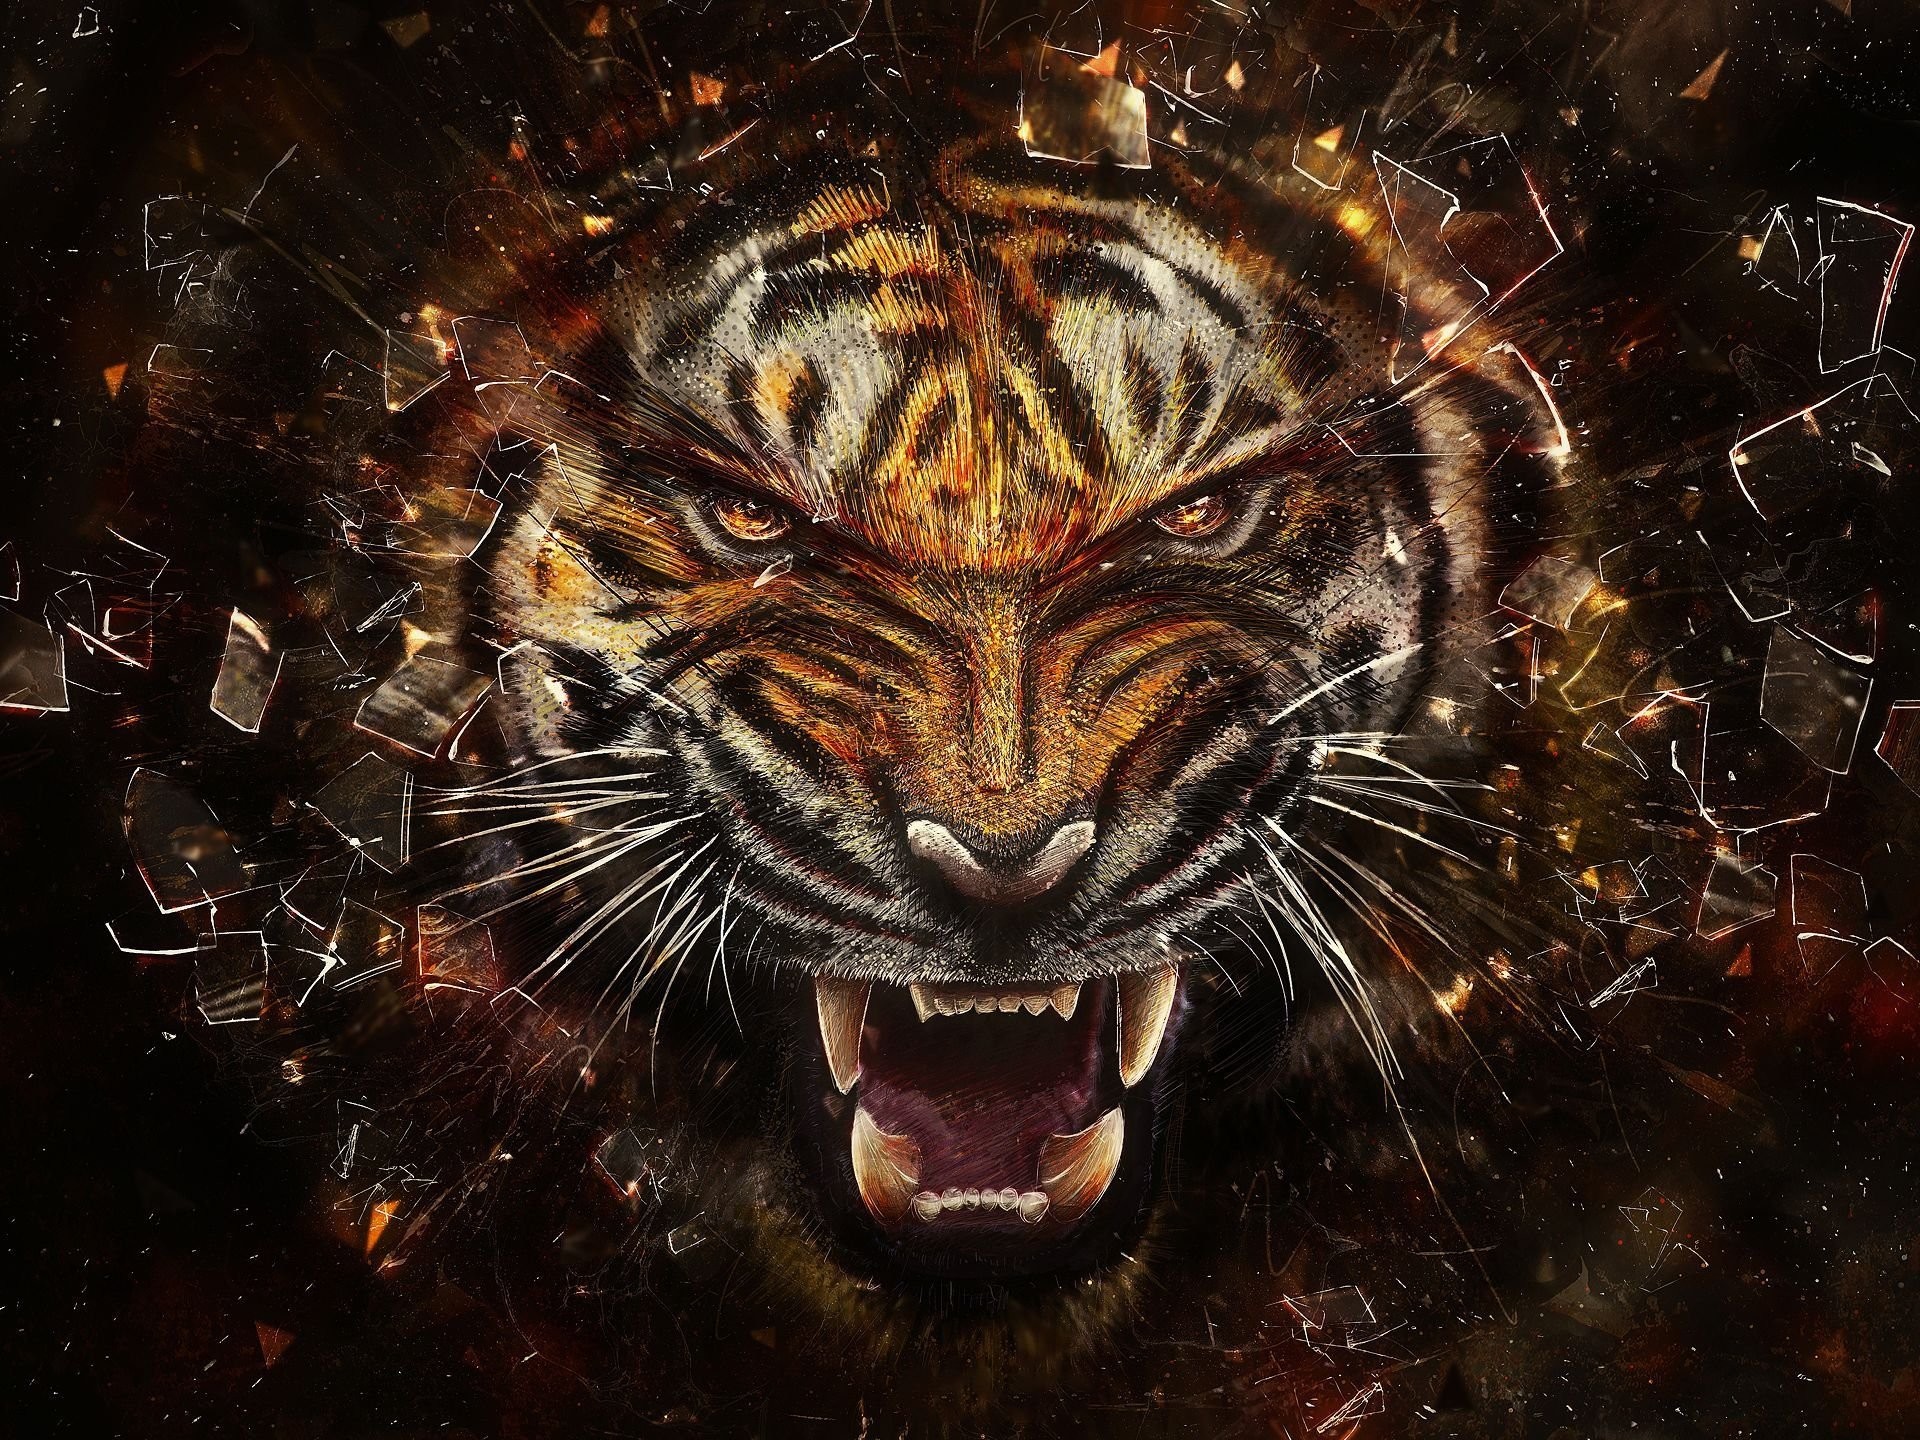 1920x1440 1185 Tiger HD Wallpapers | Backgrounds - Wallpaper Abyss